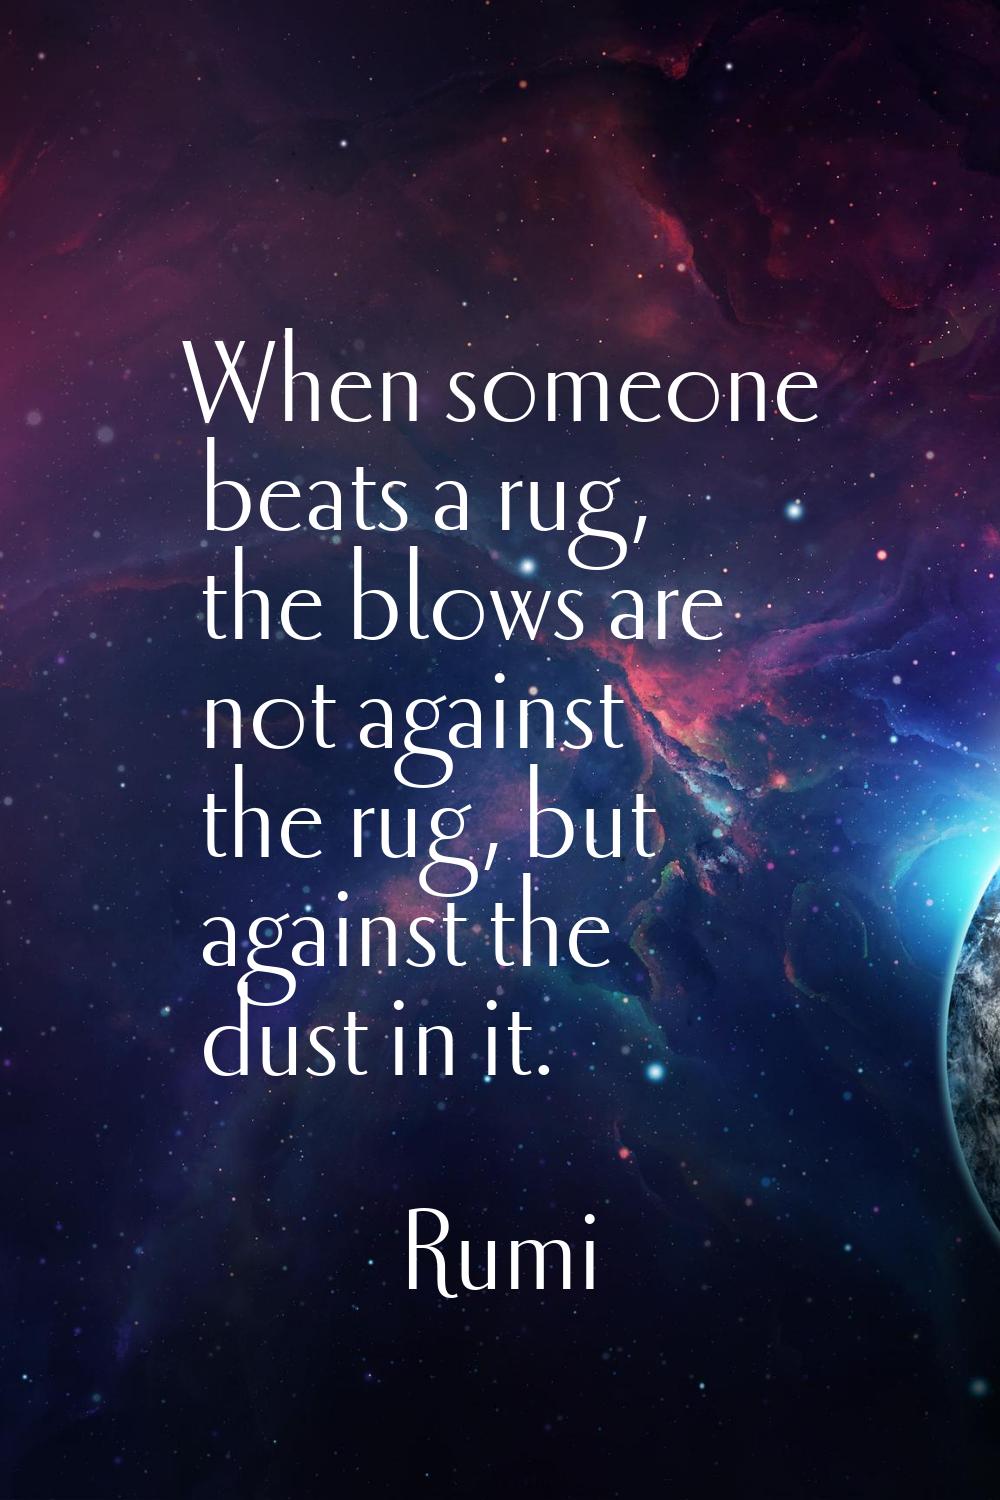 When someone beats a rug, the blows are not against the rug, but against the dust in it.